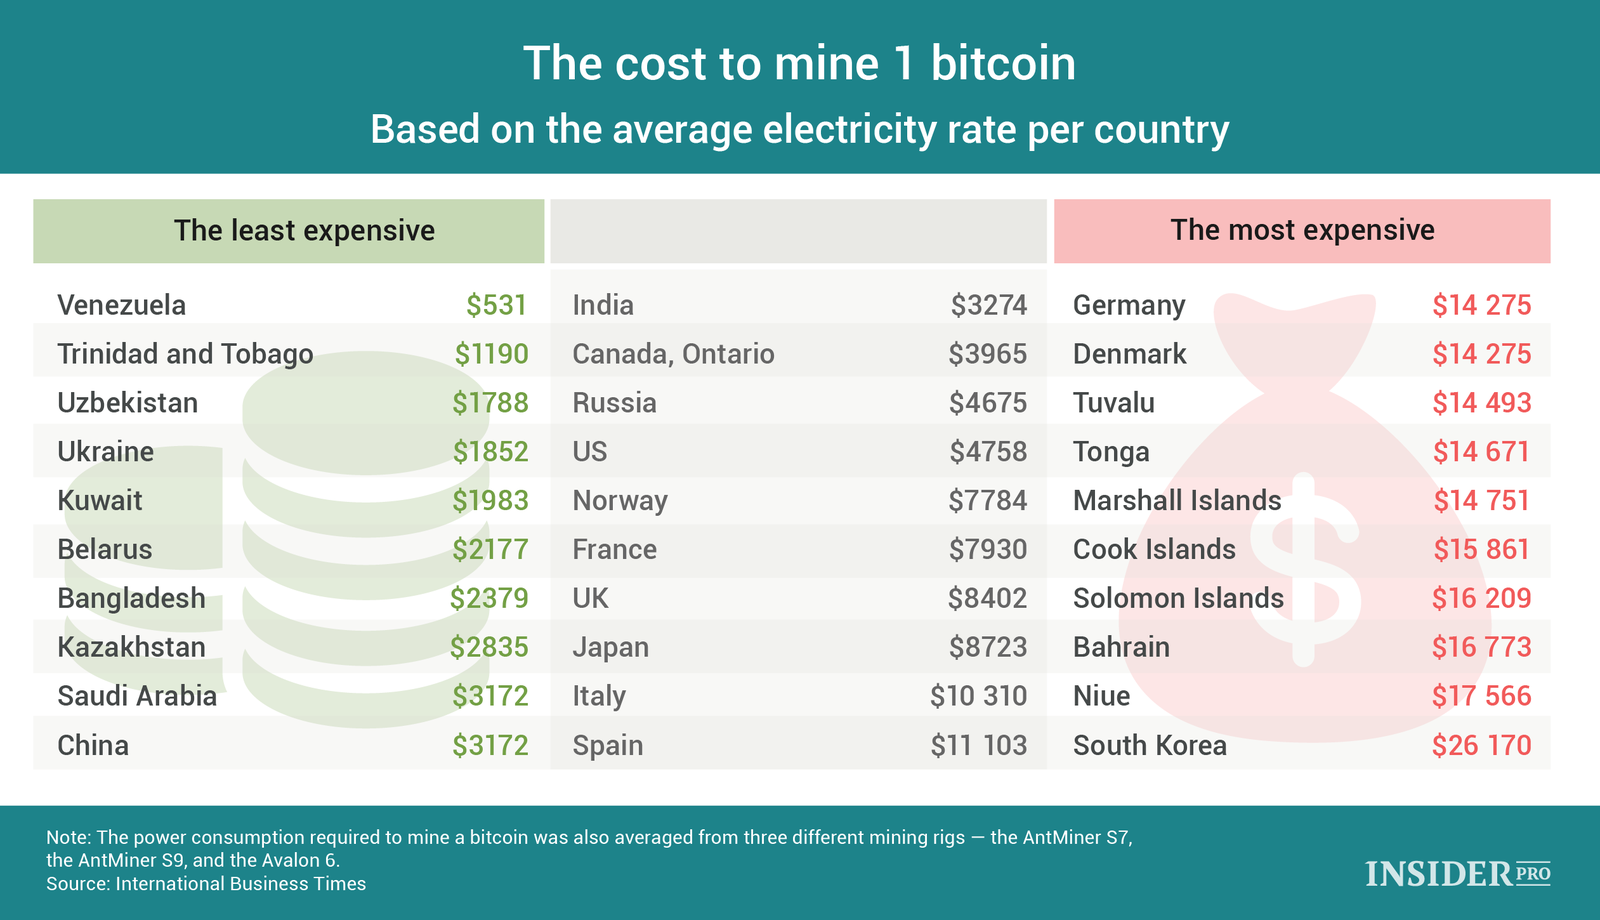 how much does it cost to buy 1 bitcoin 2020